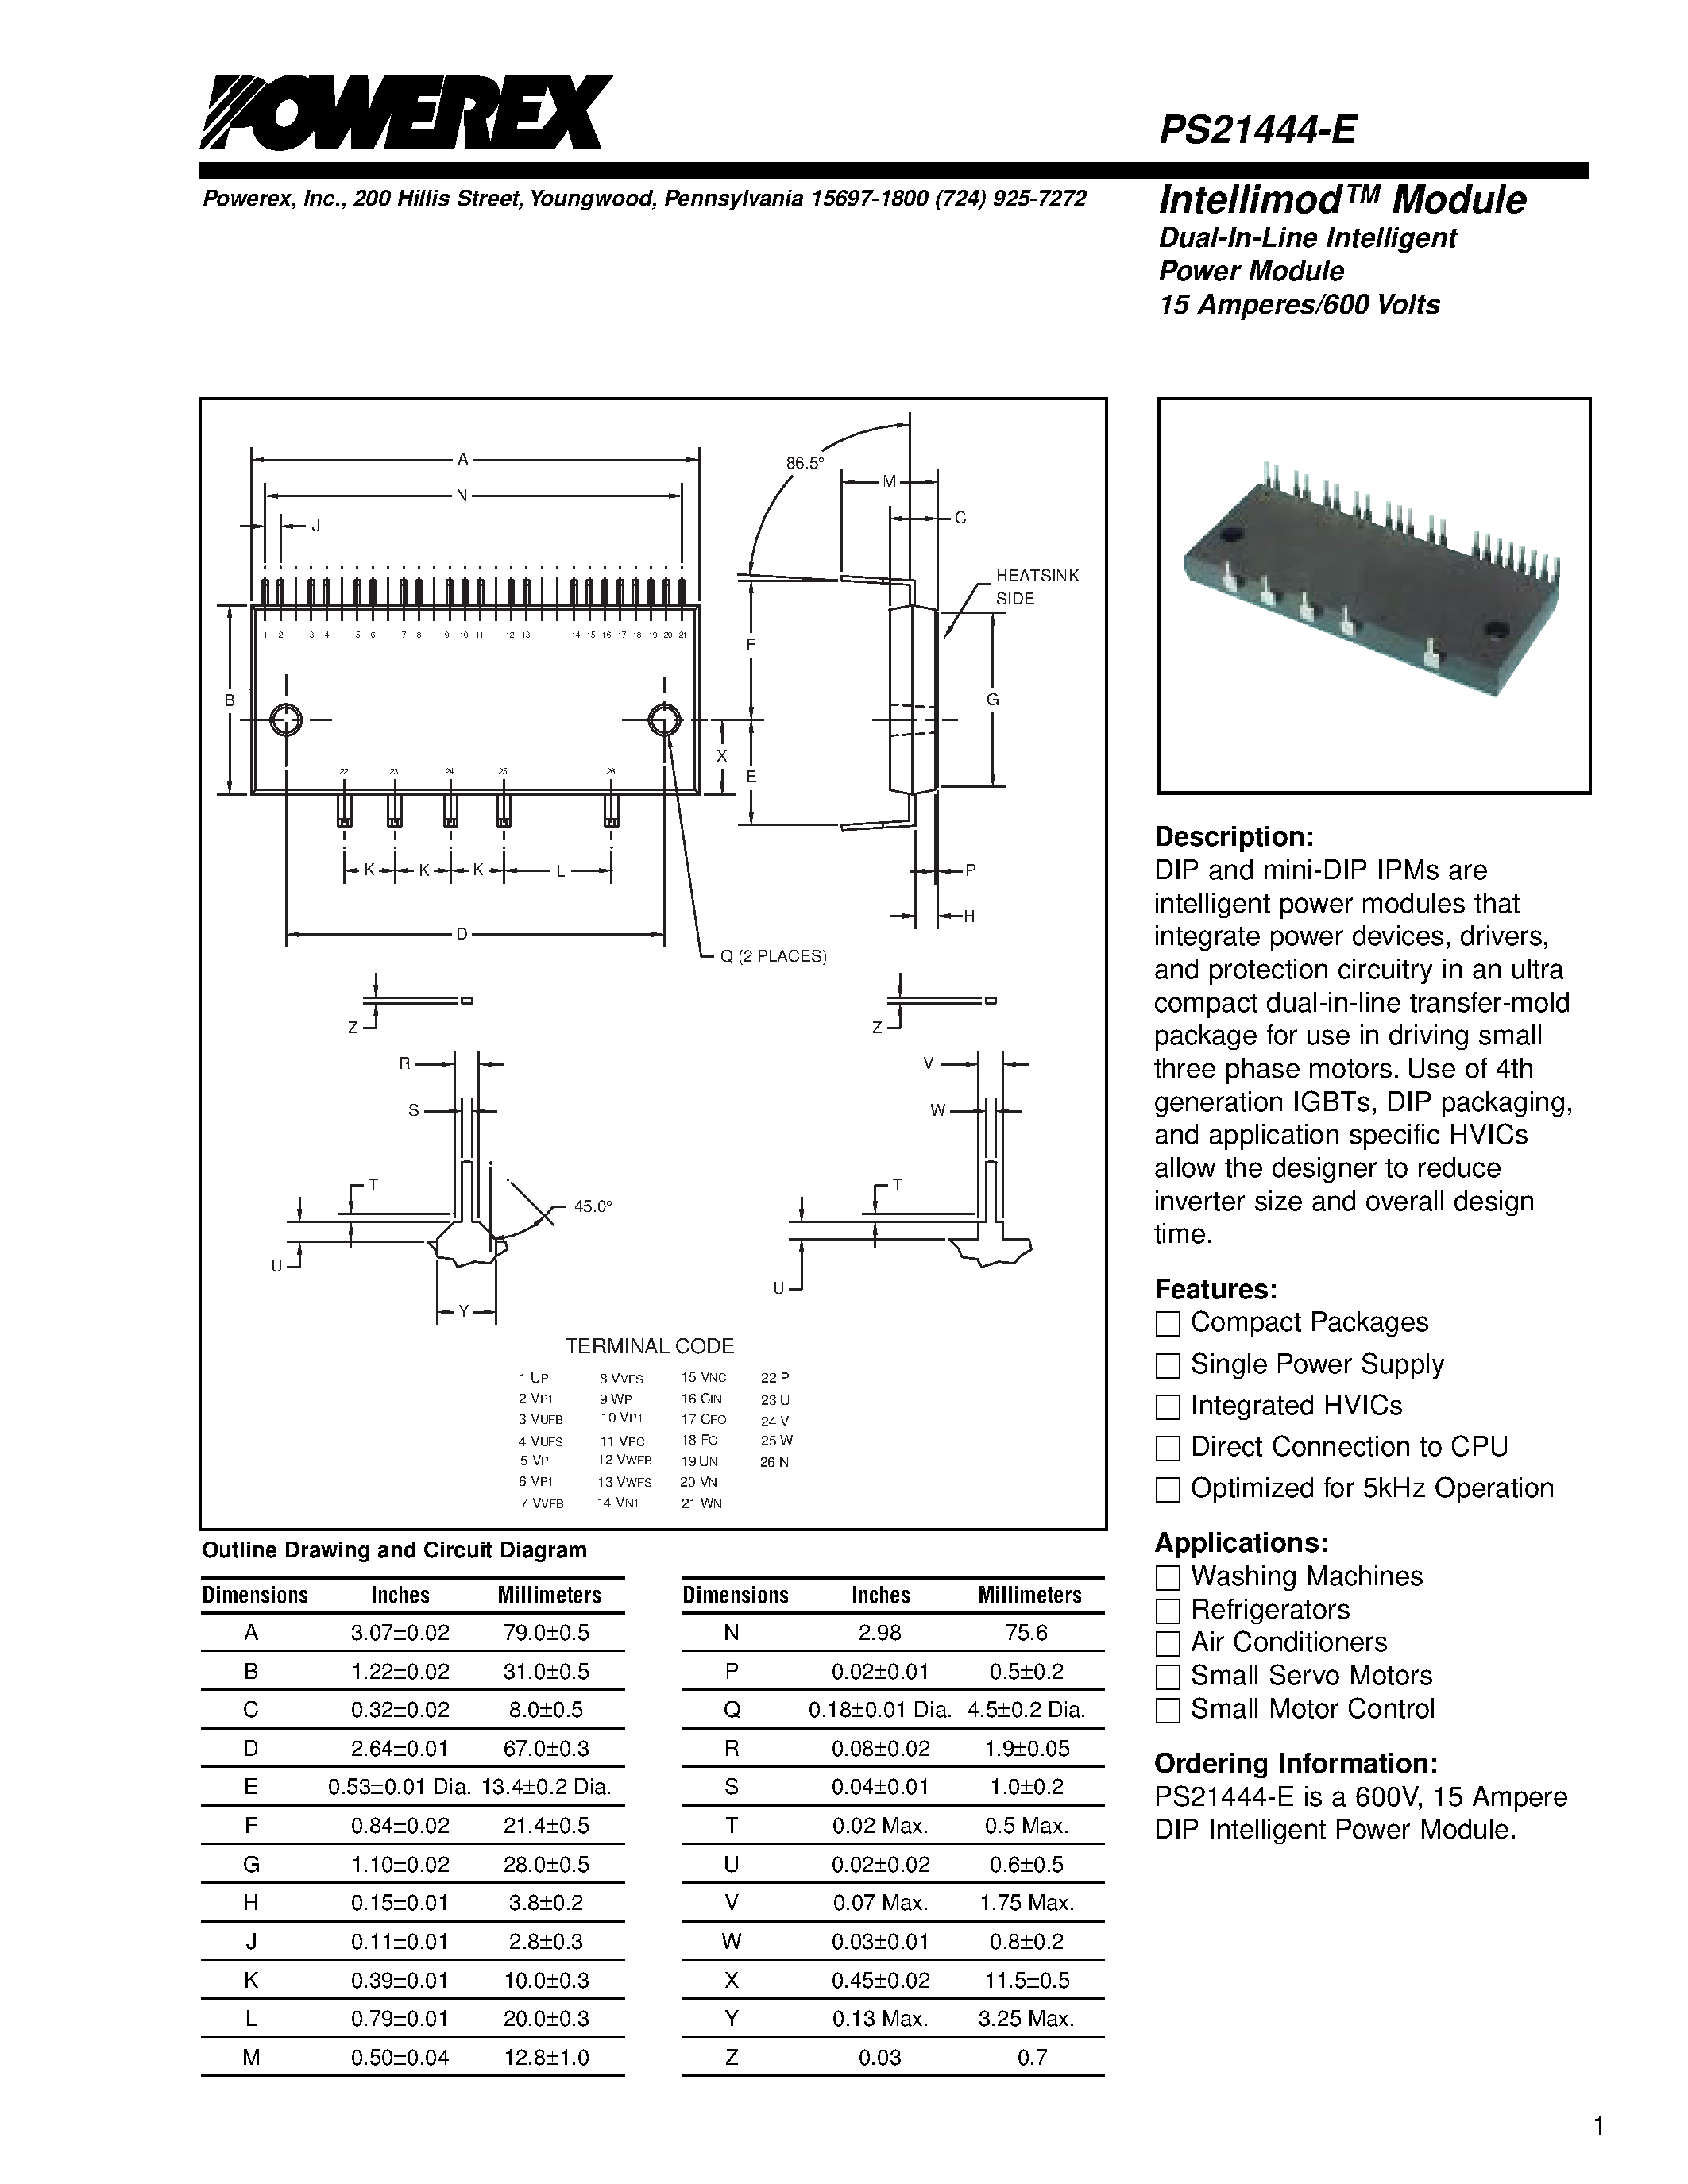 Datasheet PS21444-E - Intellimod Module Dual-In-Line Intelligent Power Module (15 Amperes/600 Volts) page 1